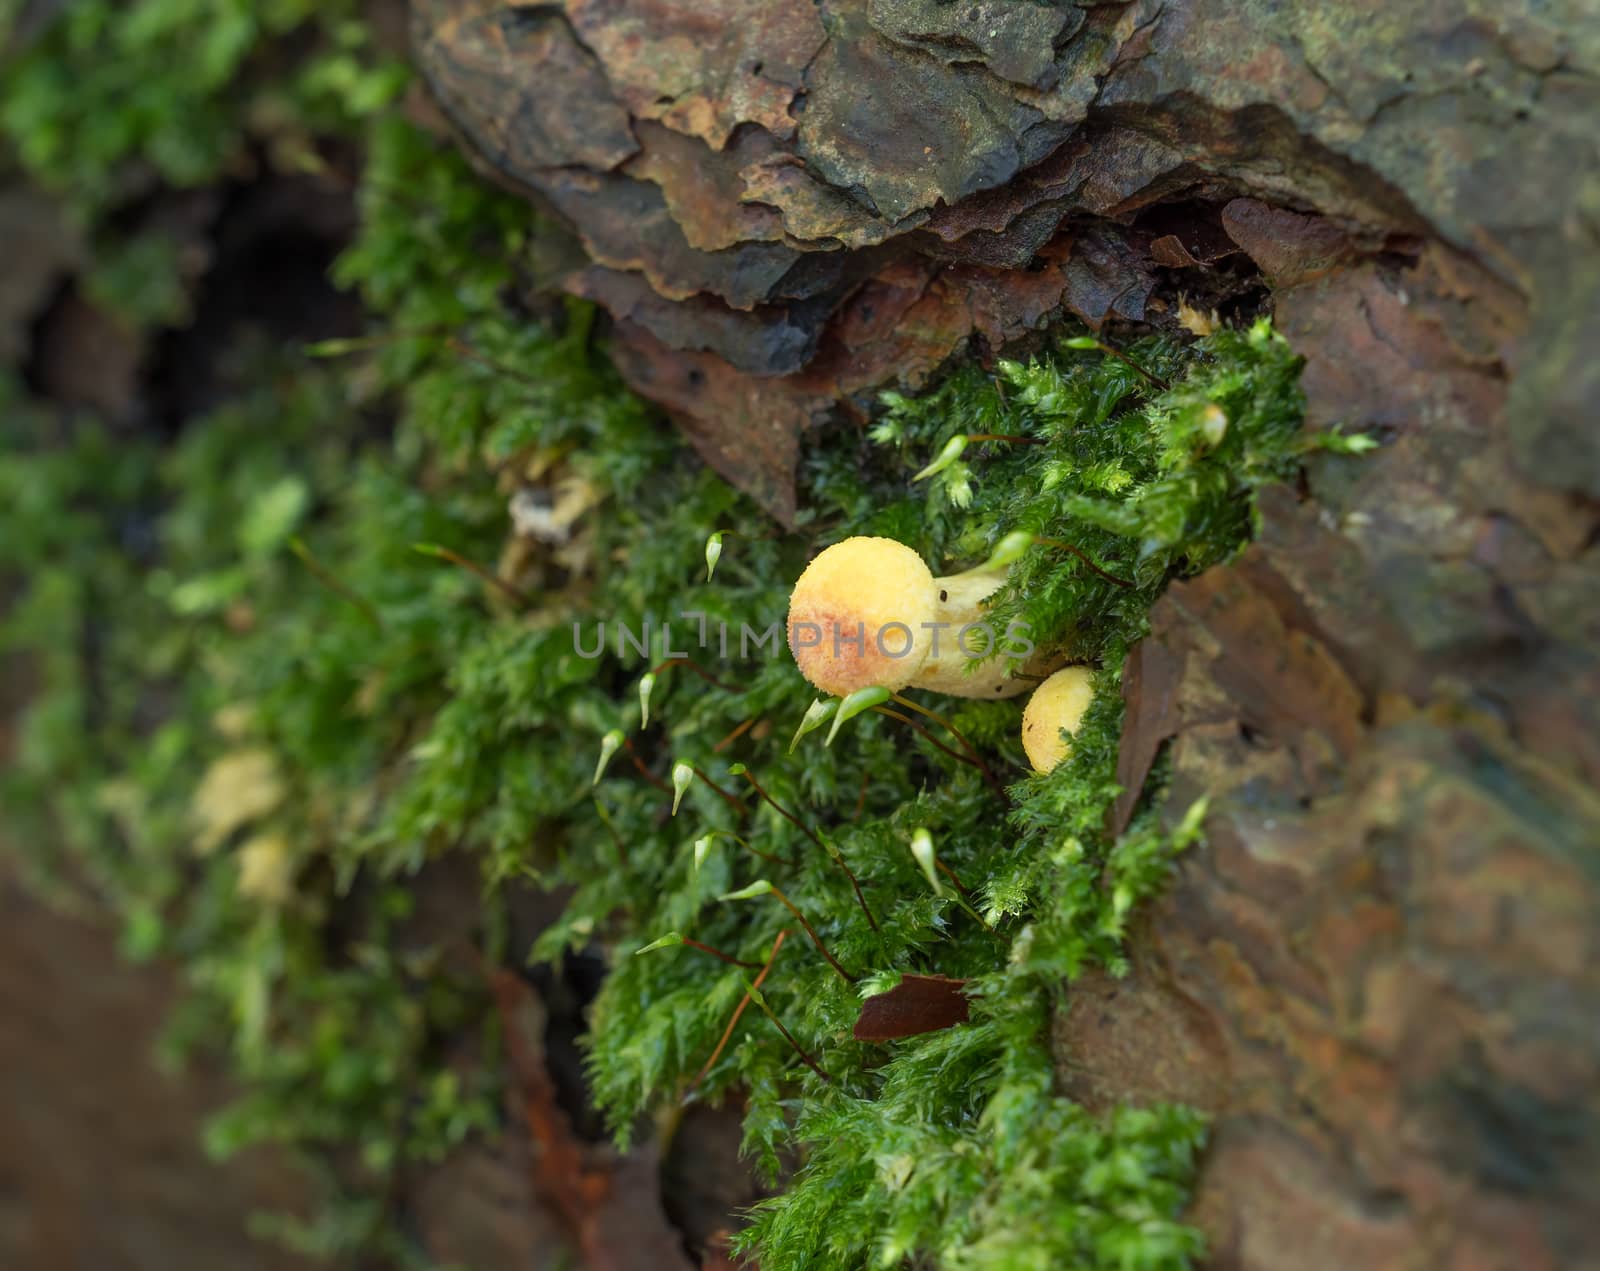 Yellow Fungus with Moss on dead tree trunk in woodland.